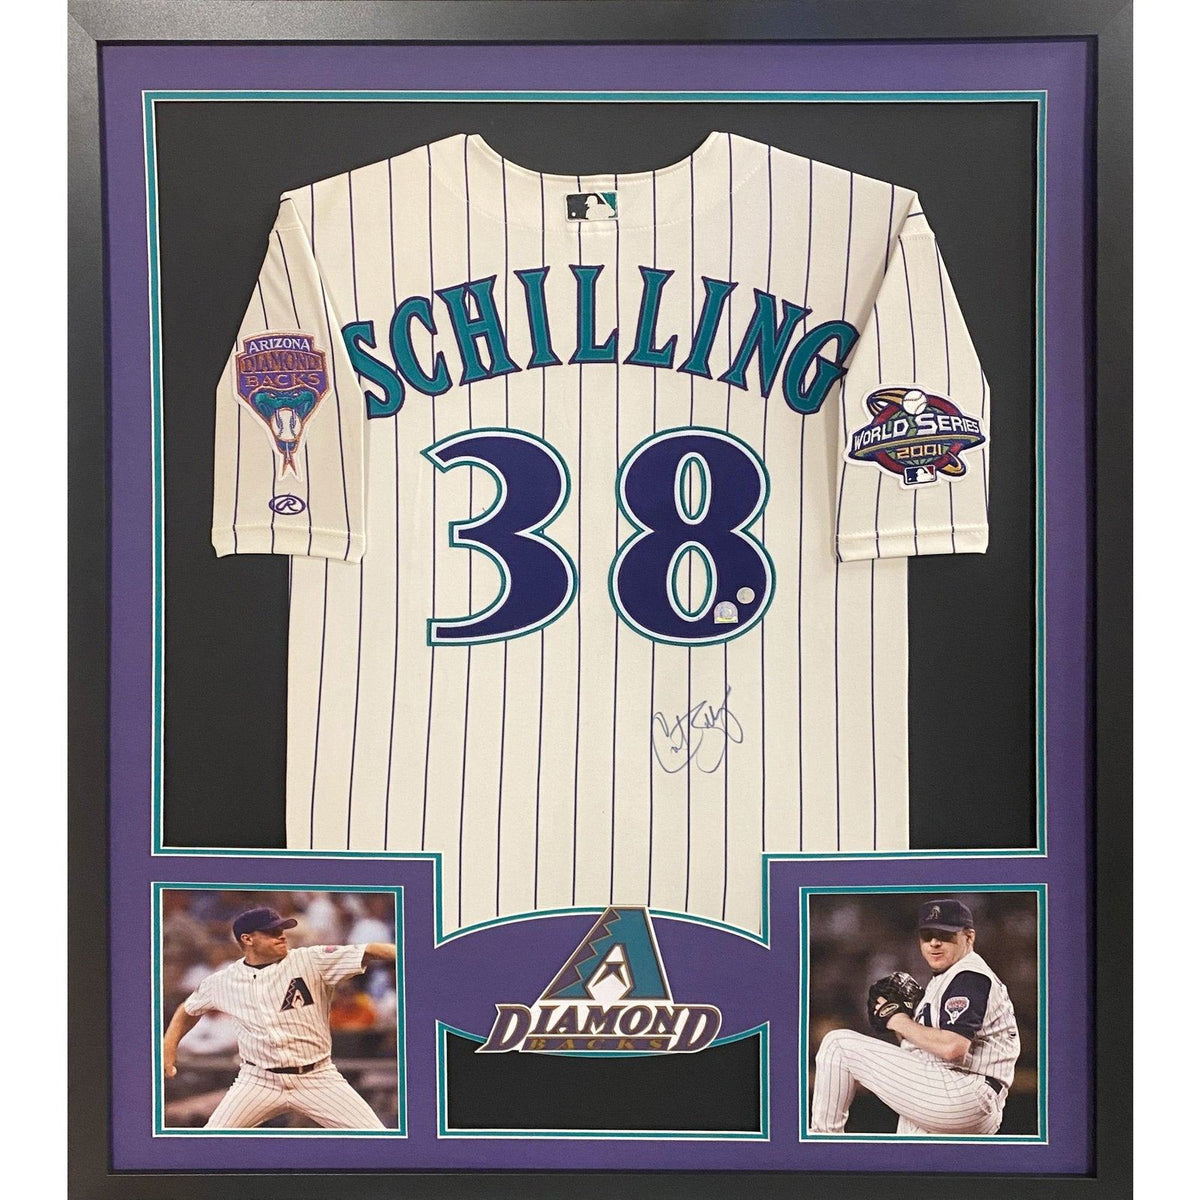 Curt Schilling Signed 2001 World Series Authentic Jersey MVP Autograph MLB  Holo